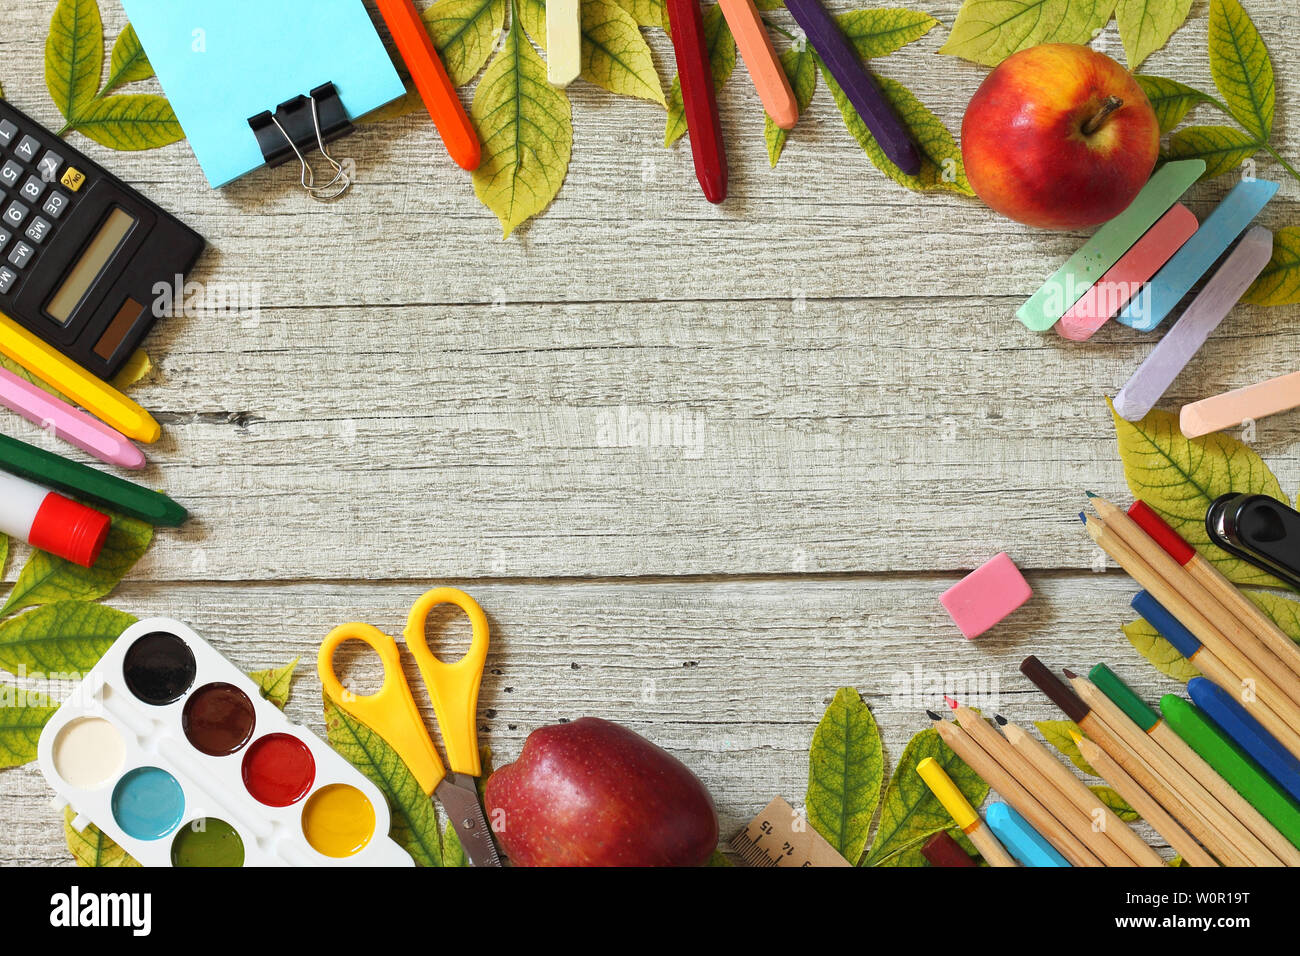 Back to school background. Table with apple, different school supplies,  stationery, pencils. Flatlay top view. Free space for your text Stock Photo  - Alamy